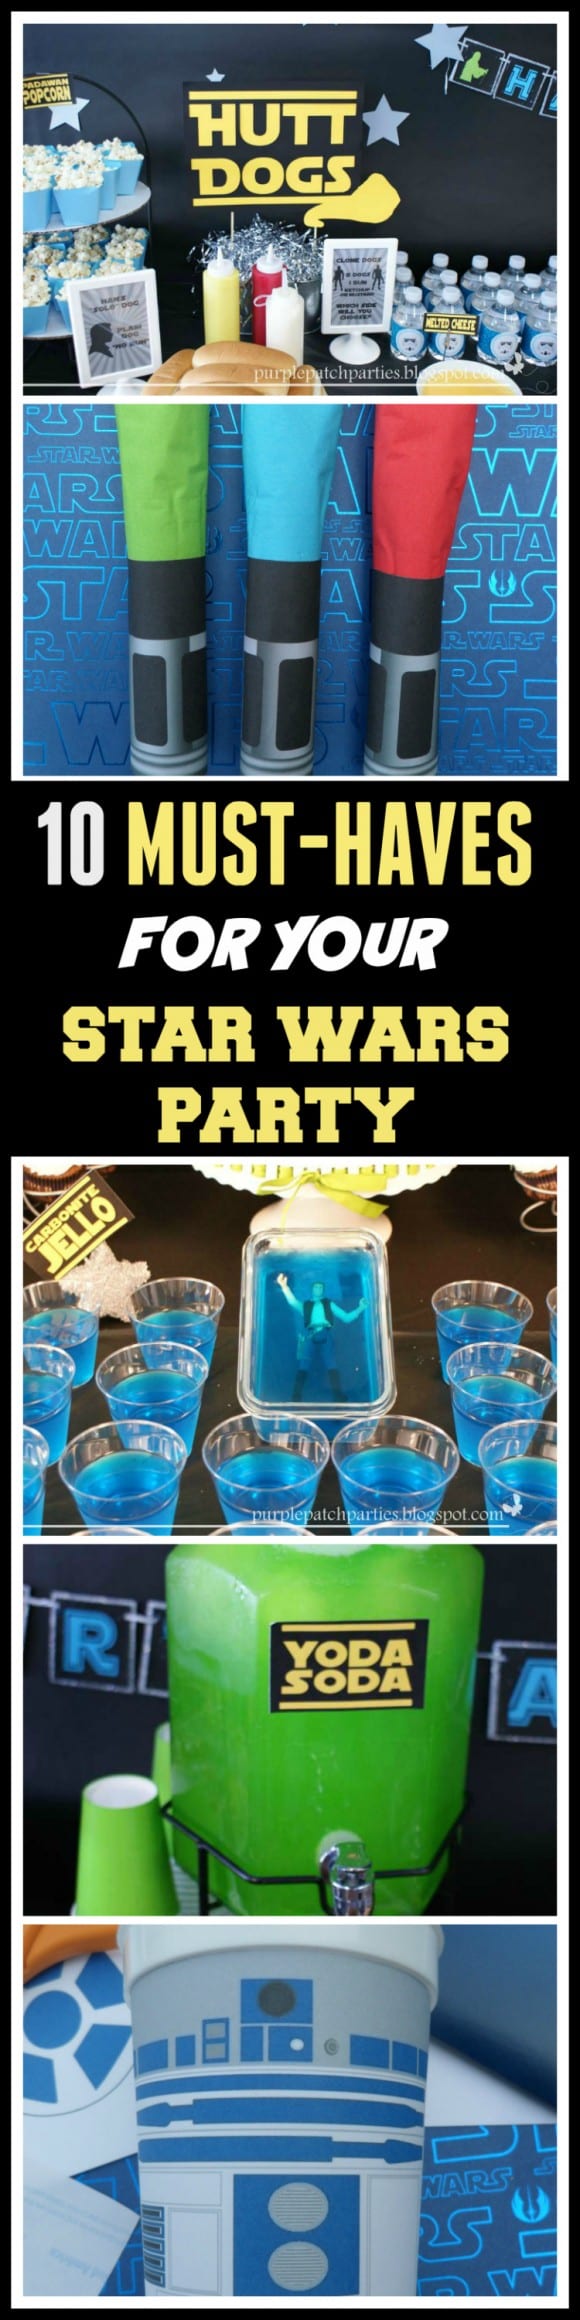 10 Awesome Star Wars party ideas | CatchMyParty.com